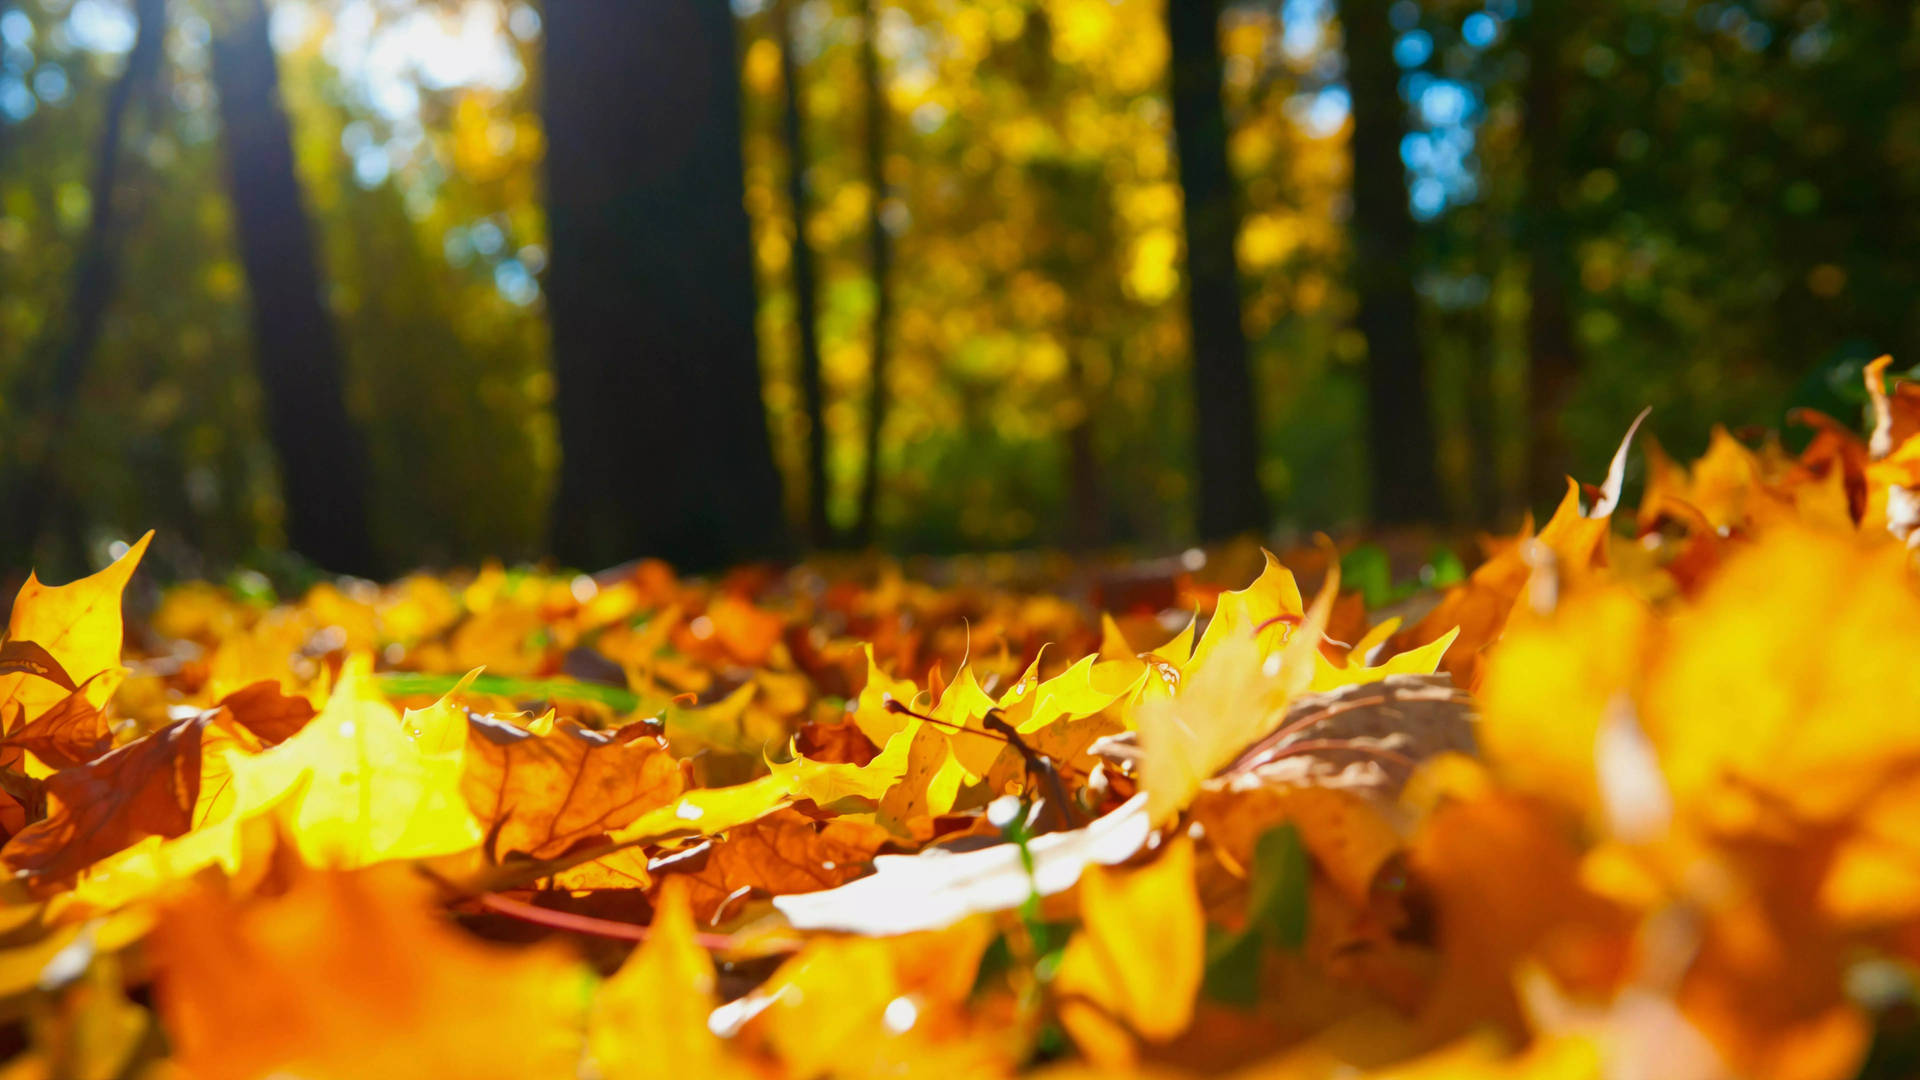 32k Ultra Hd Nature Autumn Leaves On Ground Background